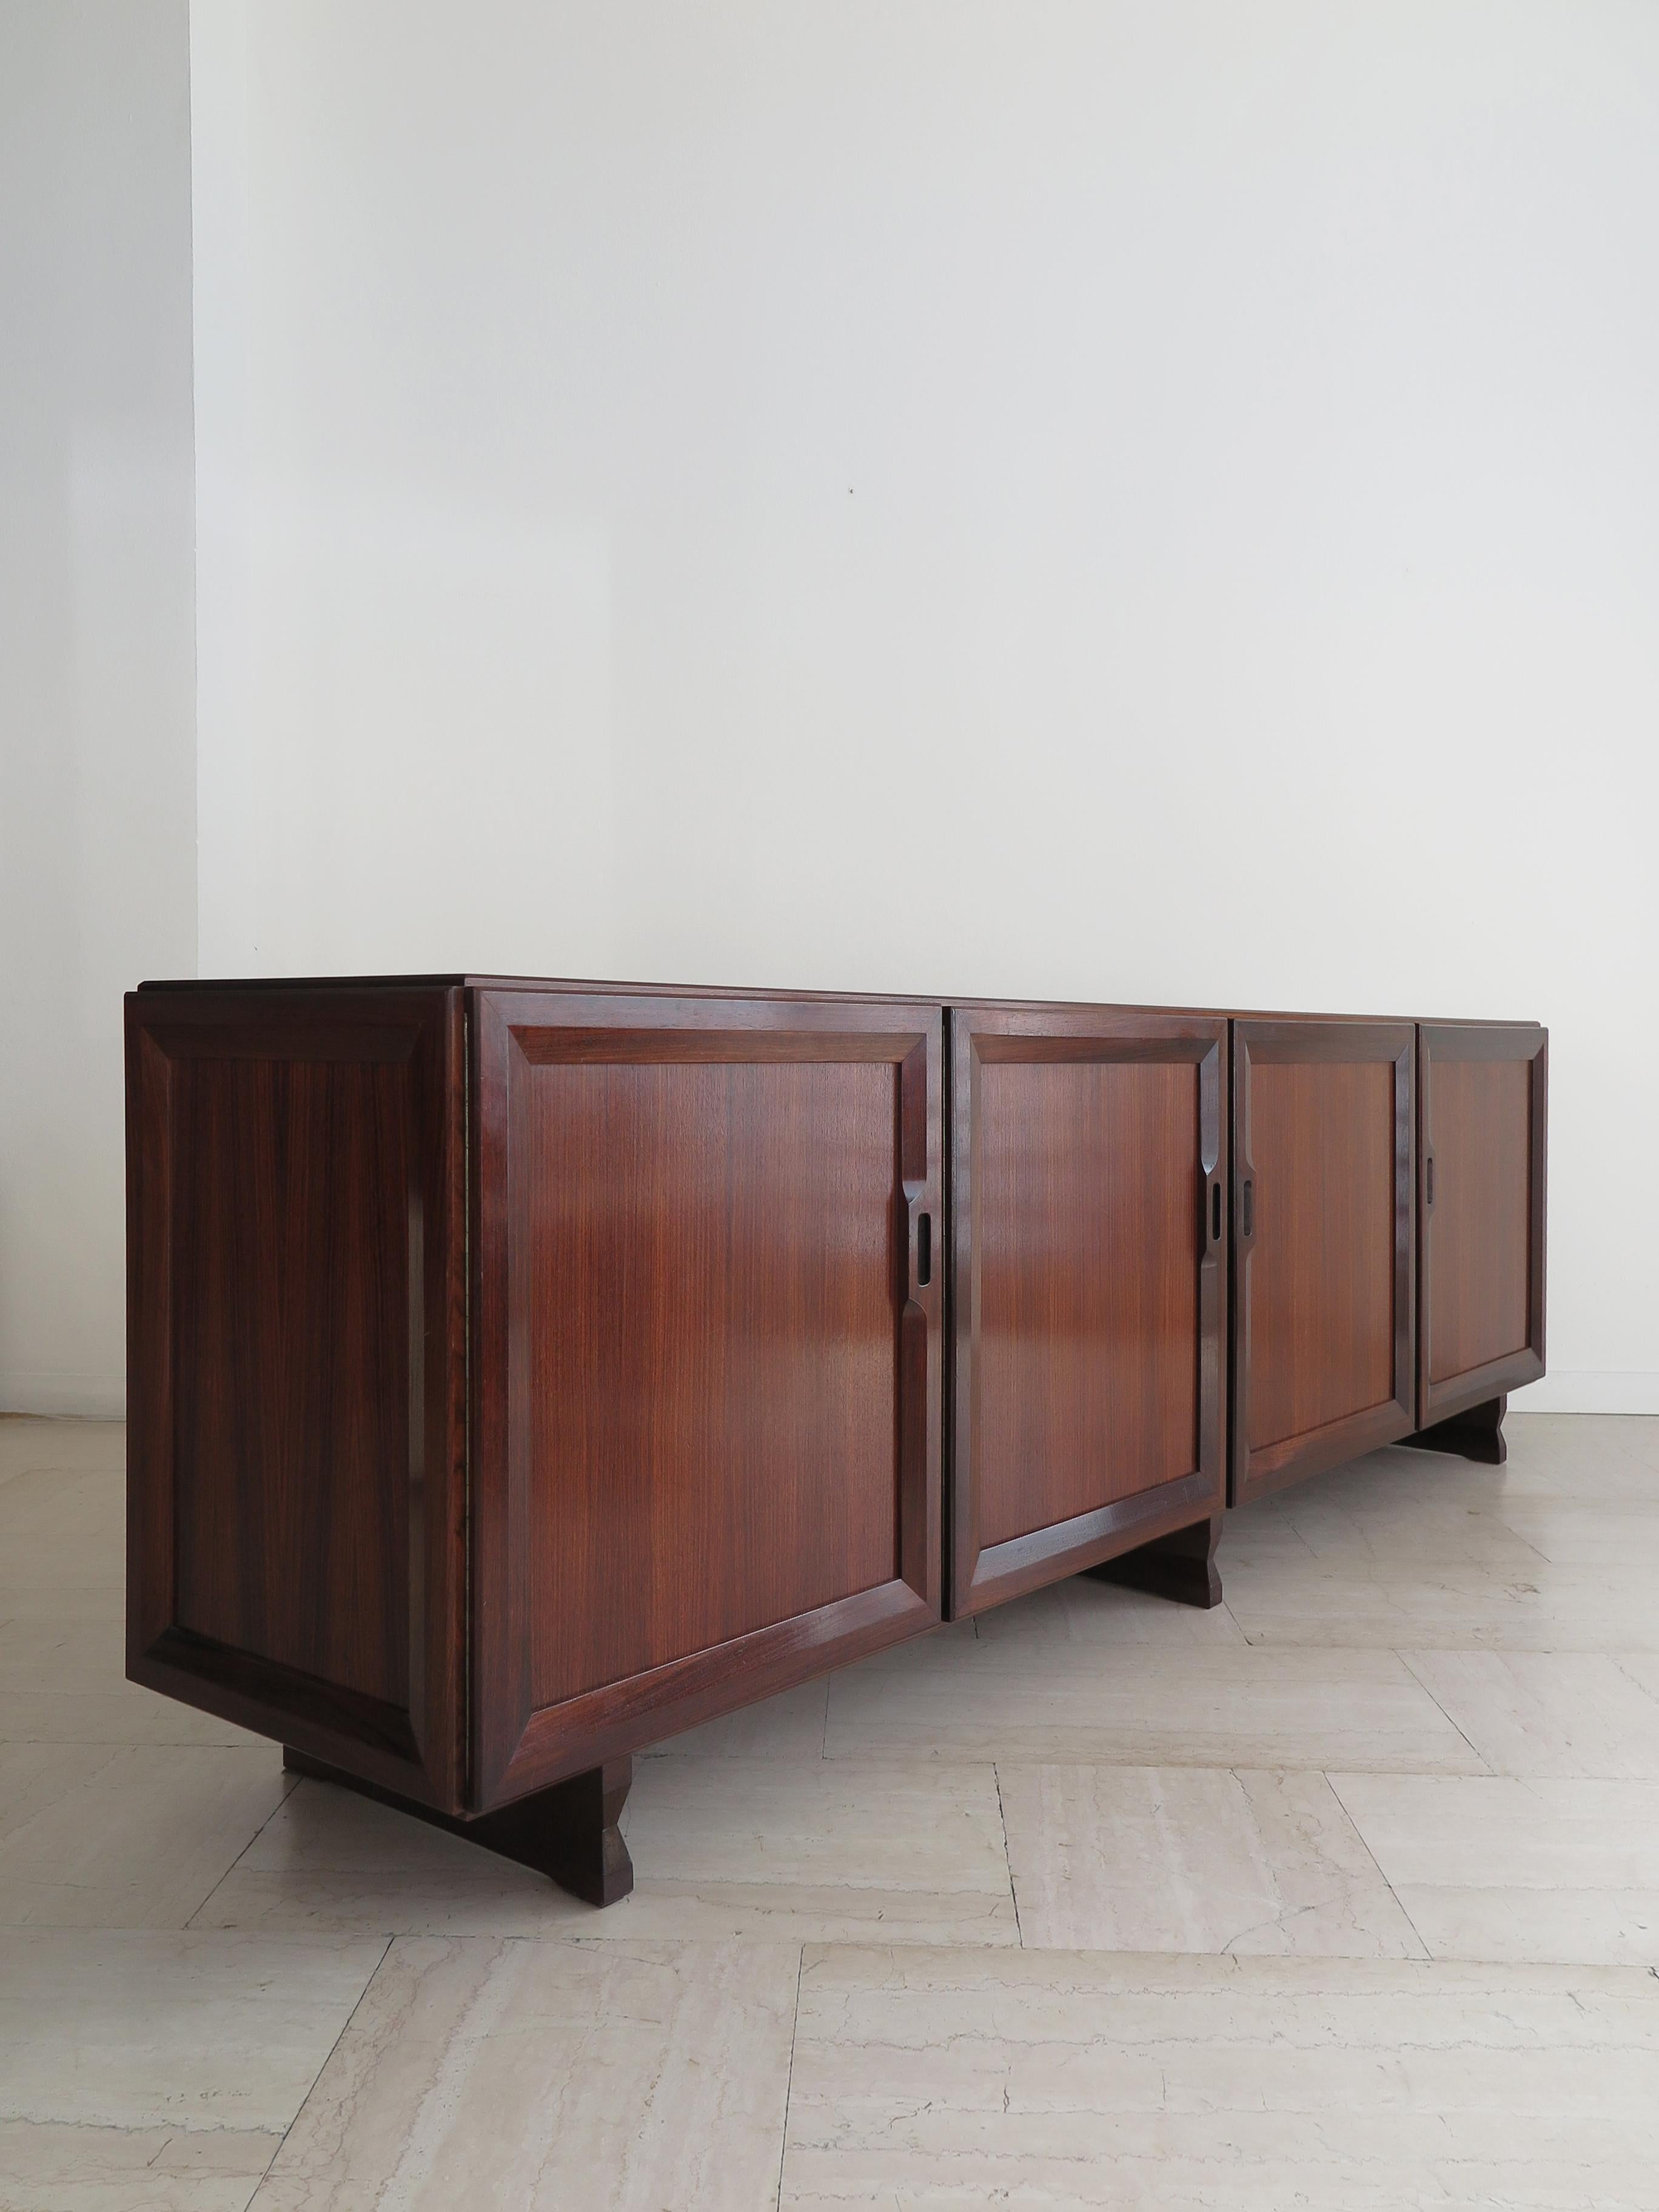 Italian Mid-Century Modern design credenza sideboard designed by Franco Albini and produced by Poggi Pavia from 1958, four doors with sliding shelves and a pull-out shelf / tray, solid dark wood, veneered and edged, Italy 1960s
Bibliography 
R.